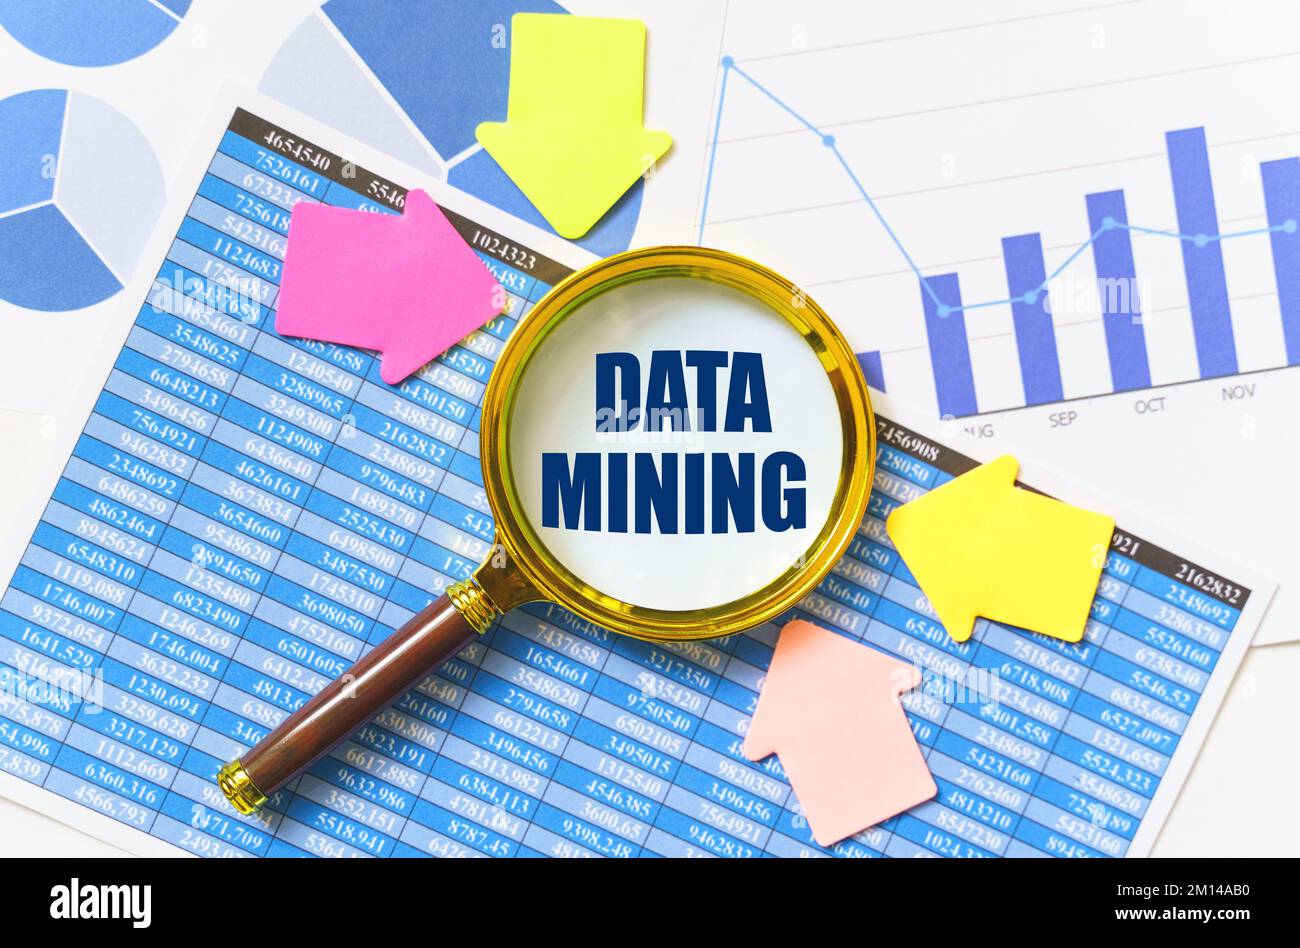 Business and finance concept. On the table are financial reports, charts and a magnifying glass, inside which the inscription - DATA MINING Stock Photo